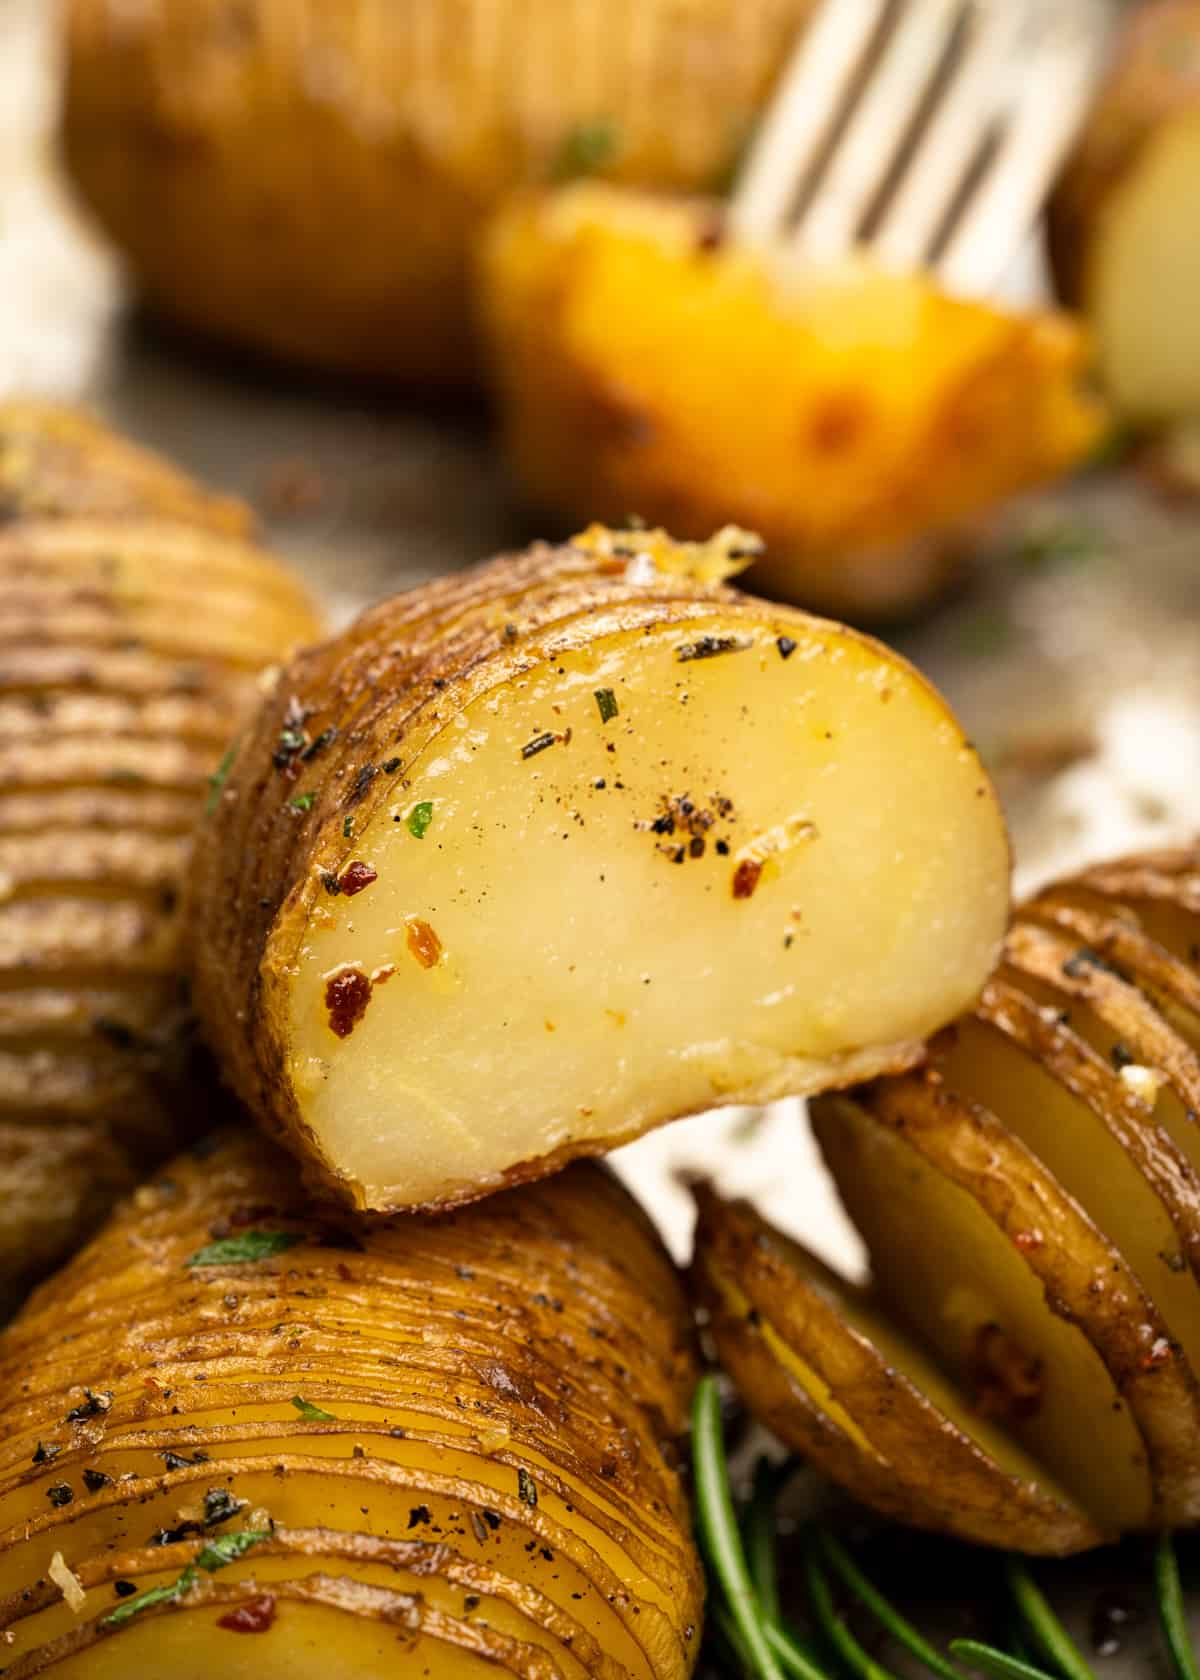 Hasselback Potatoes are a fun way to serve baked potatoes. Potatoes are sliced thin, flavoured with garlic rosemary butter, then baked until they are crispy on the outside and cooked perfectly on the inside. 